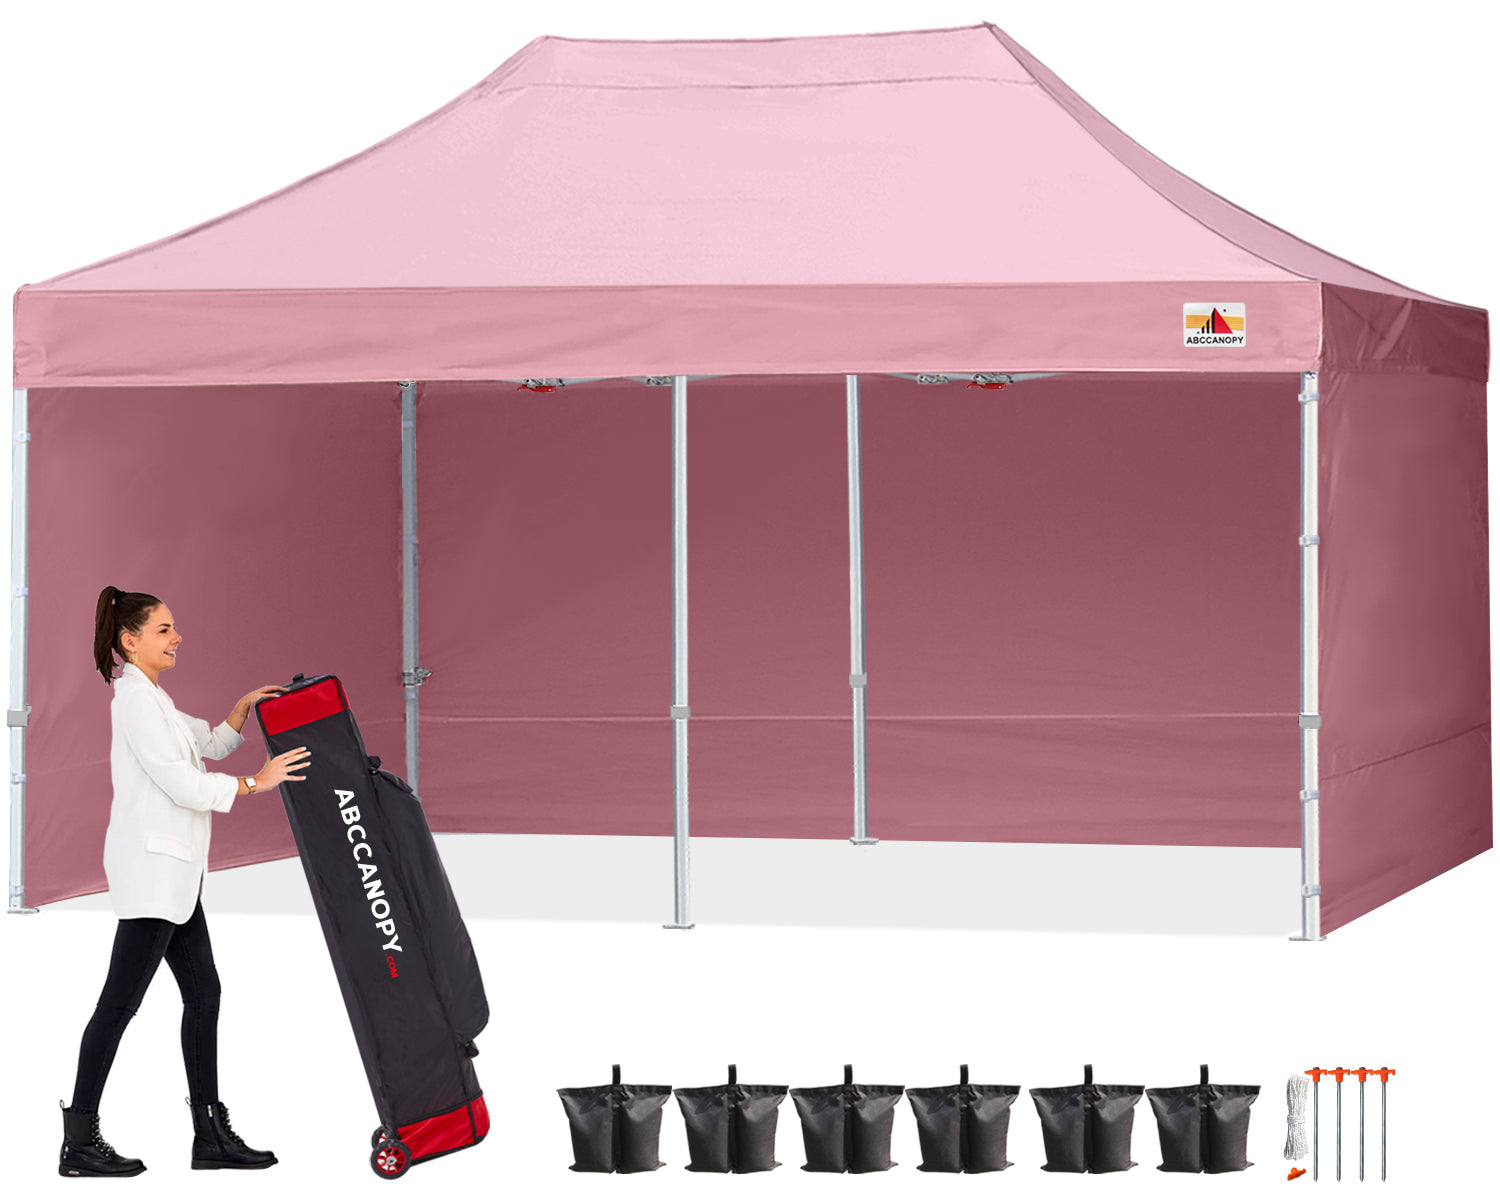 S1 Commercial Pop Up 10x10/10x15/10x20 Canopy Tent with Sidewalls